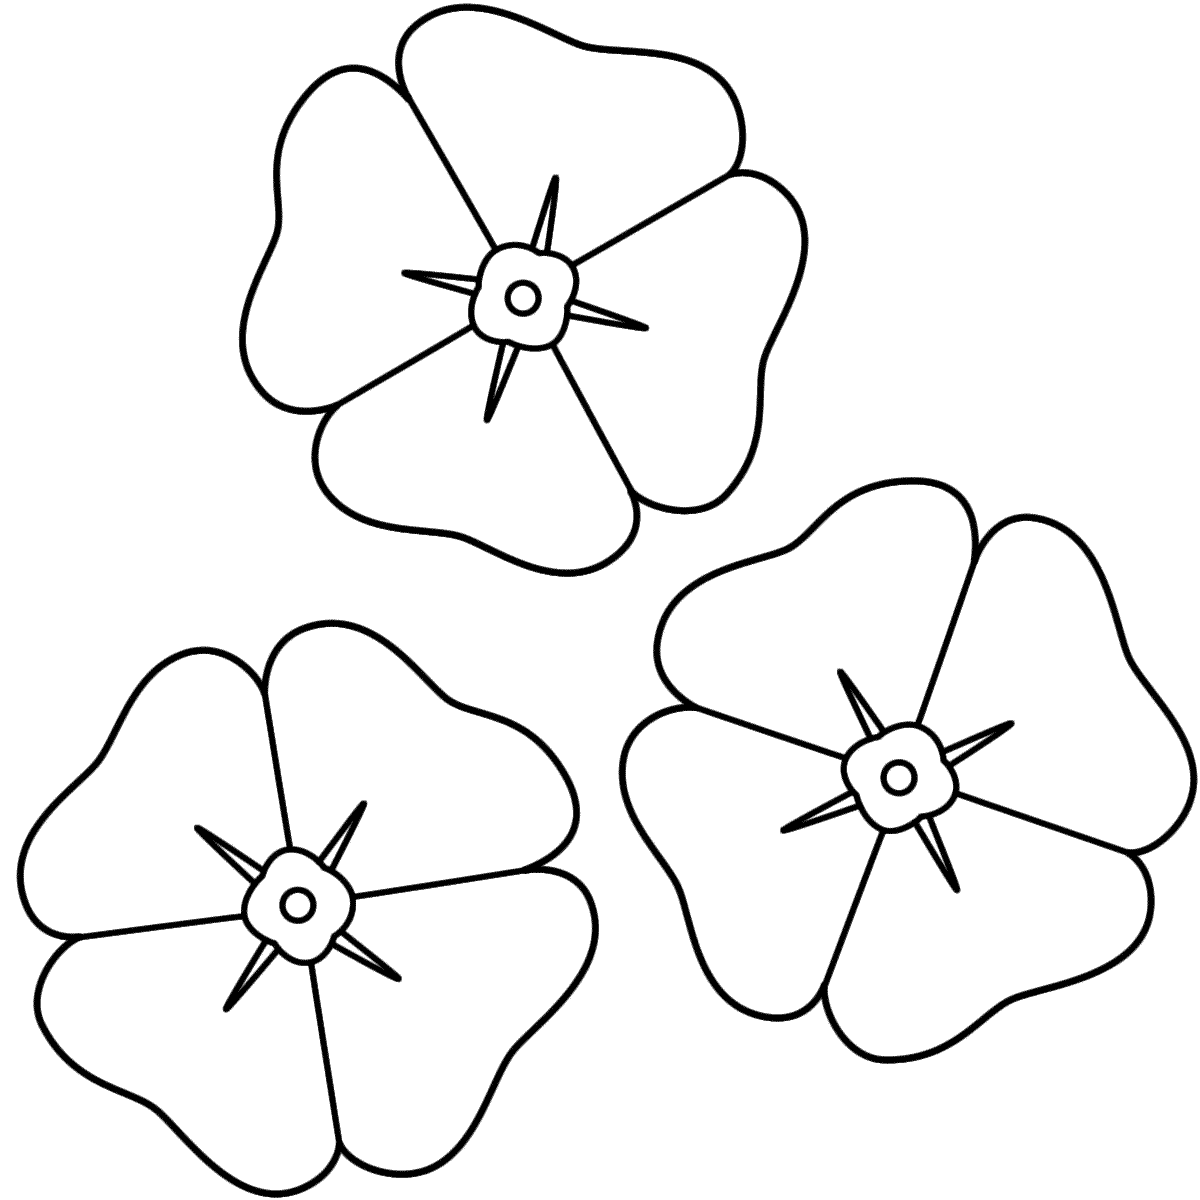 Poppies - Coloring Page (Remembrance Day)